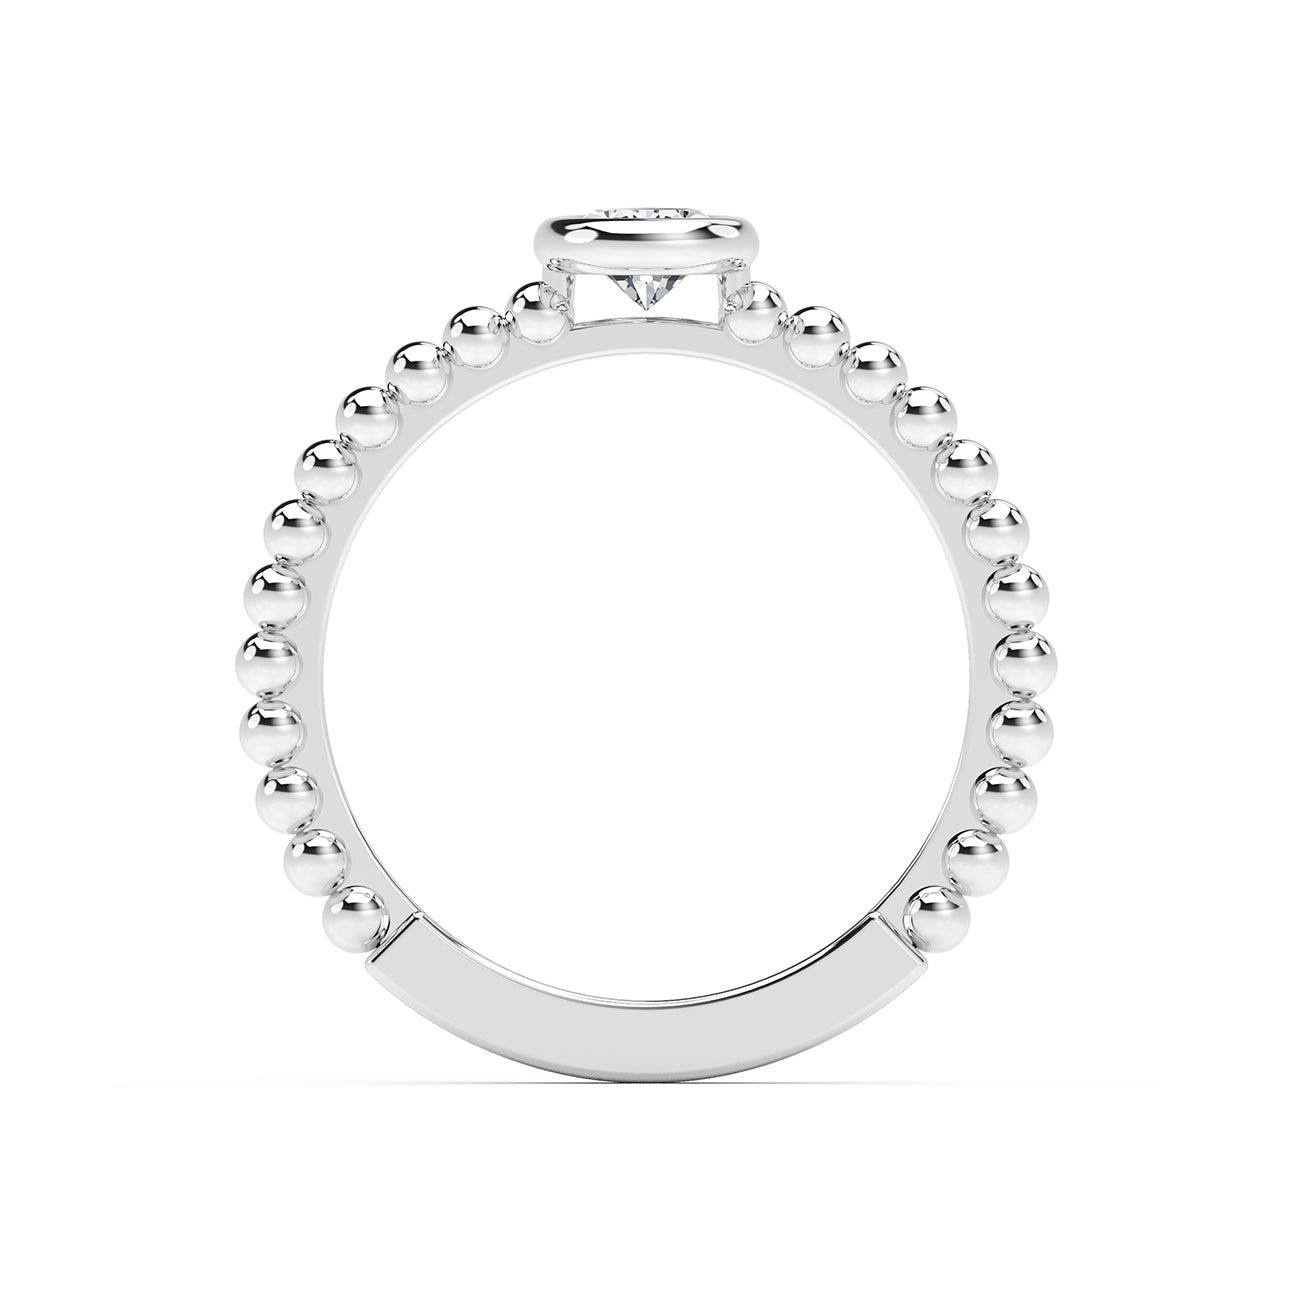 Forevermark Tribute Collection Diamond Stackable Ring - Diamond Fashion Rings - Women's